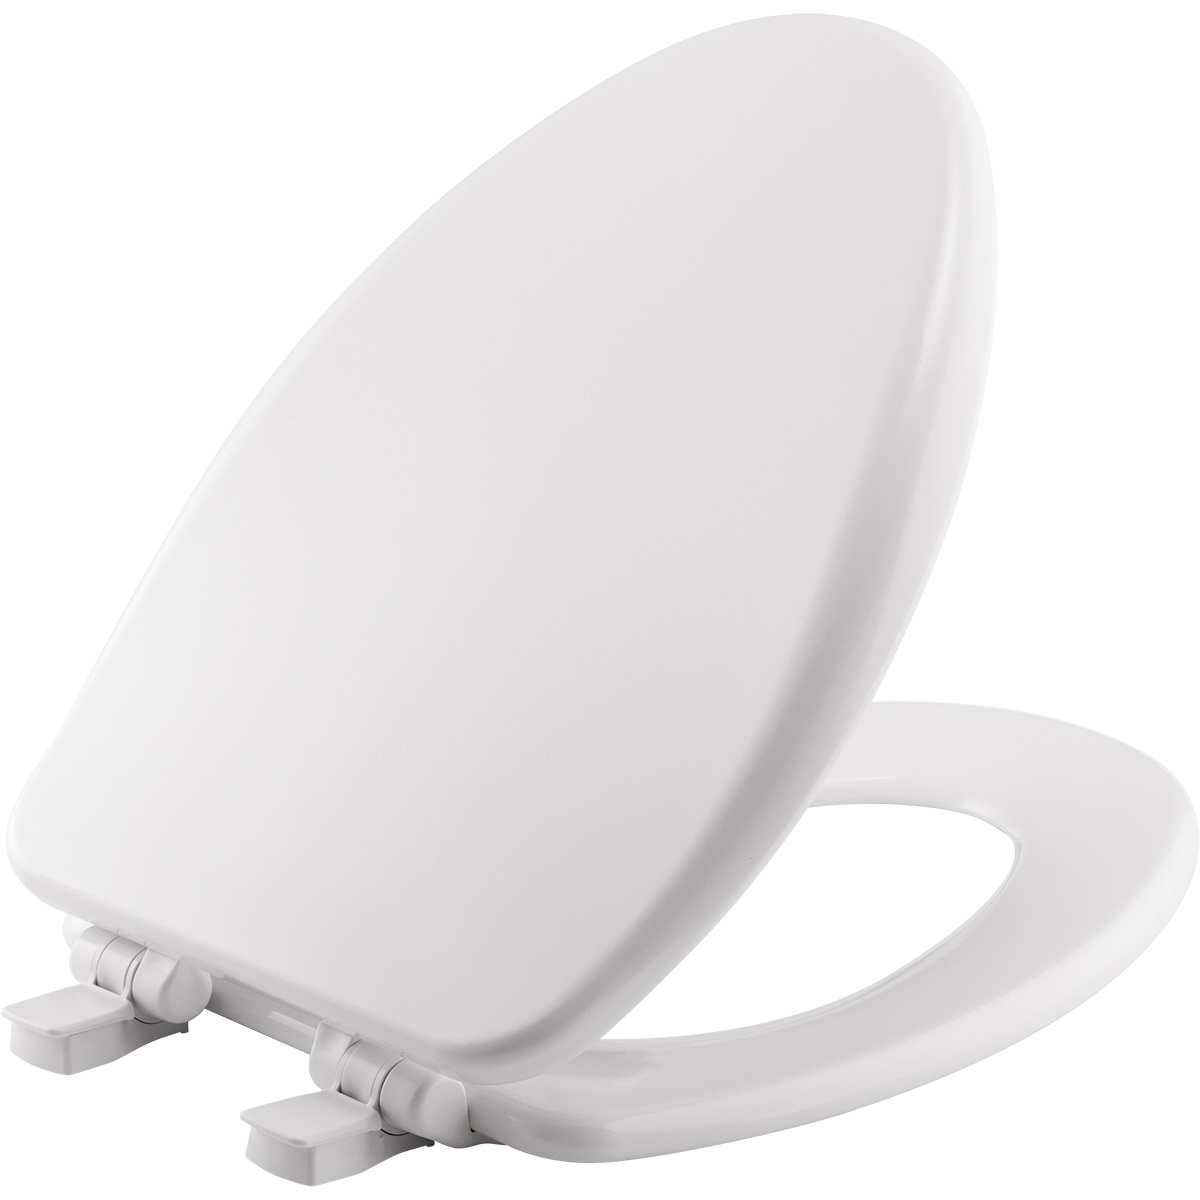 Mayfair 164SLOW 000 Toilet Seat, Elongated, Wood, White, Easy Clean and Change Hinge